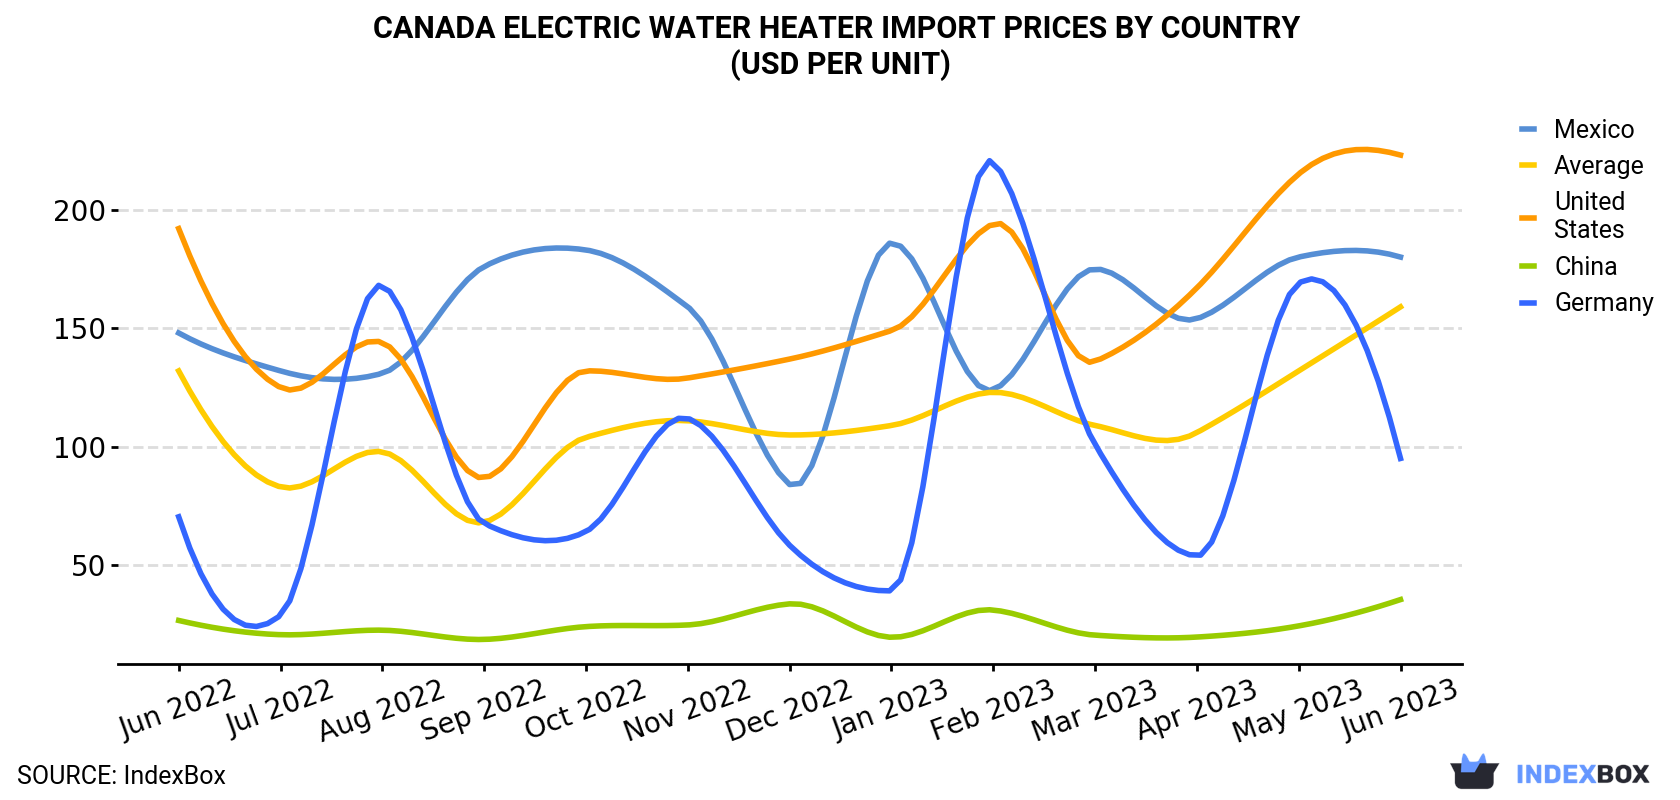 Canada Electric Water Heater Import Prices By Country (USD Per Unit)